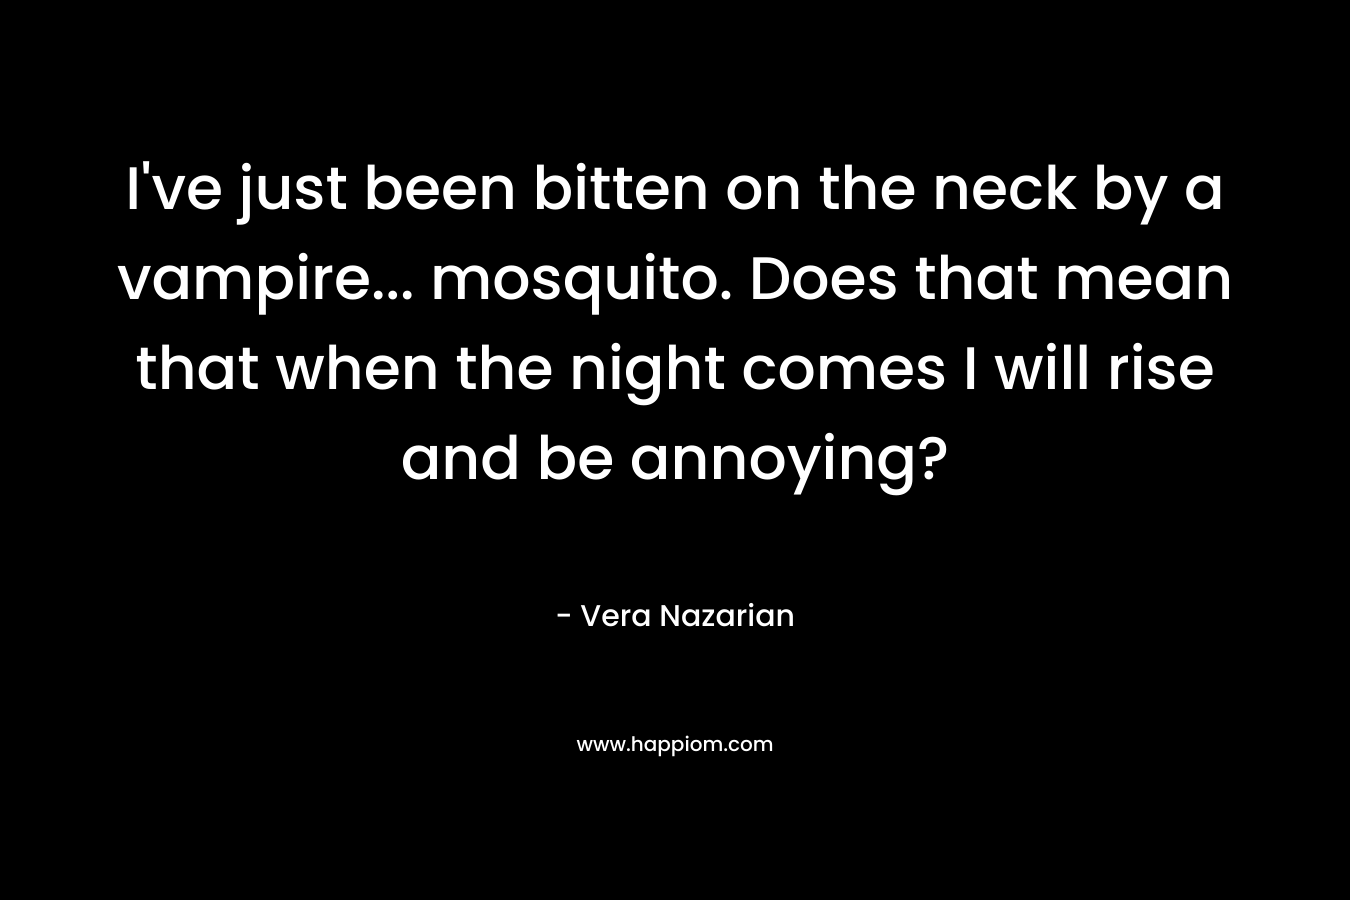 I've just been bitten on the neck by a vampire... mosquito. Does that mean that when the night comes I will rise and be annoying?